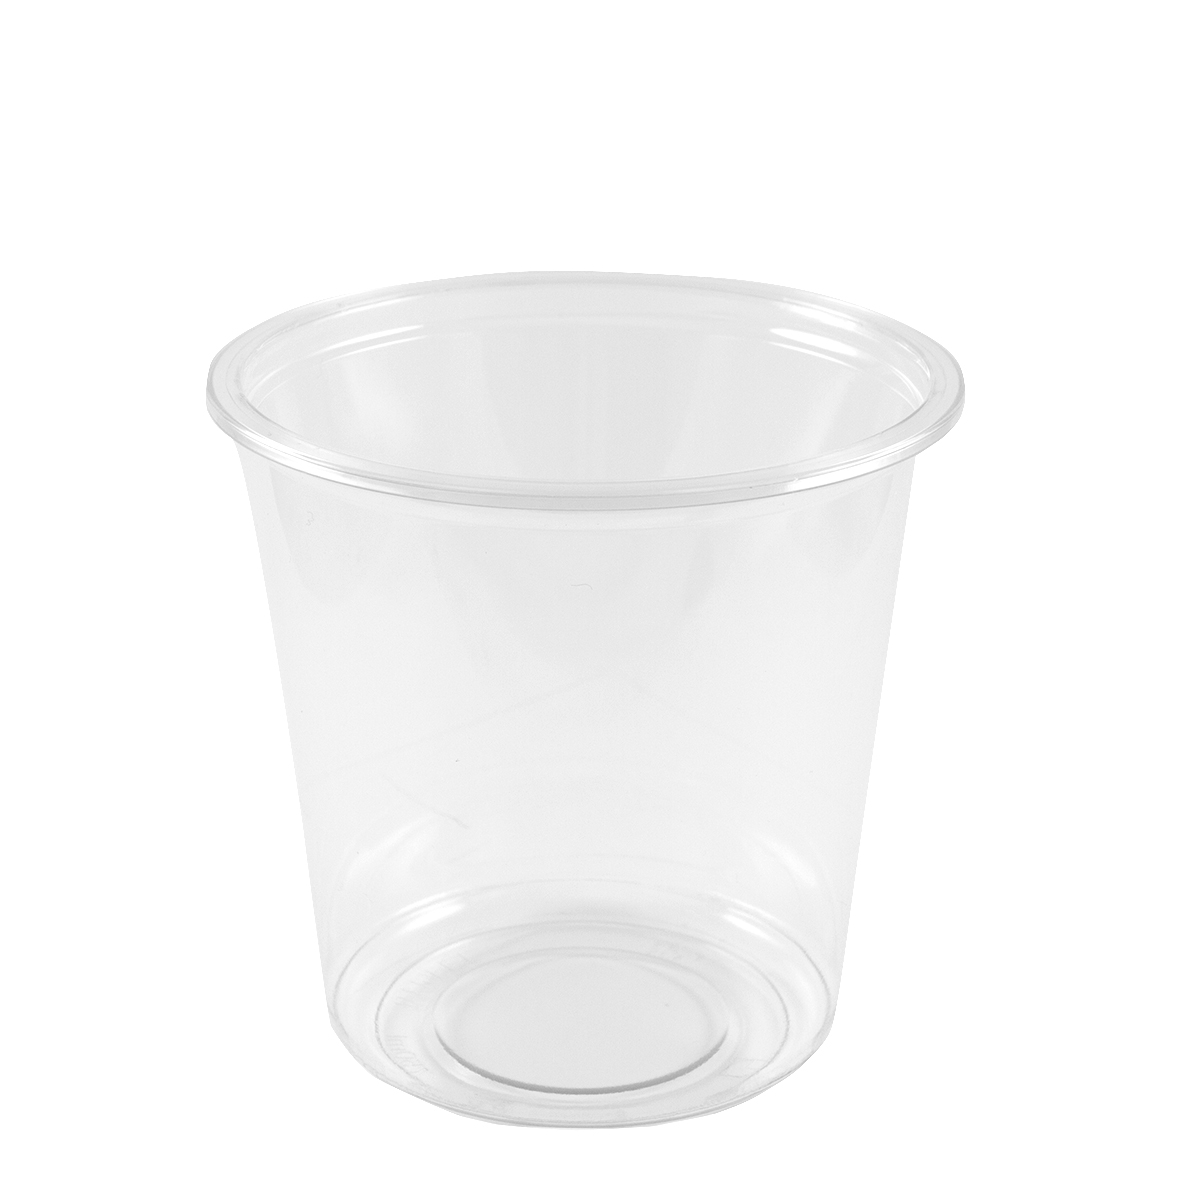 Tusipack Round Food Cup, 750 ml